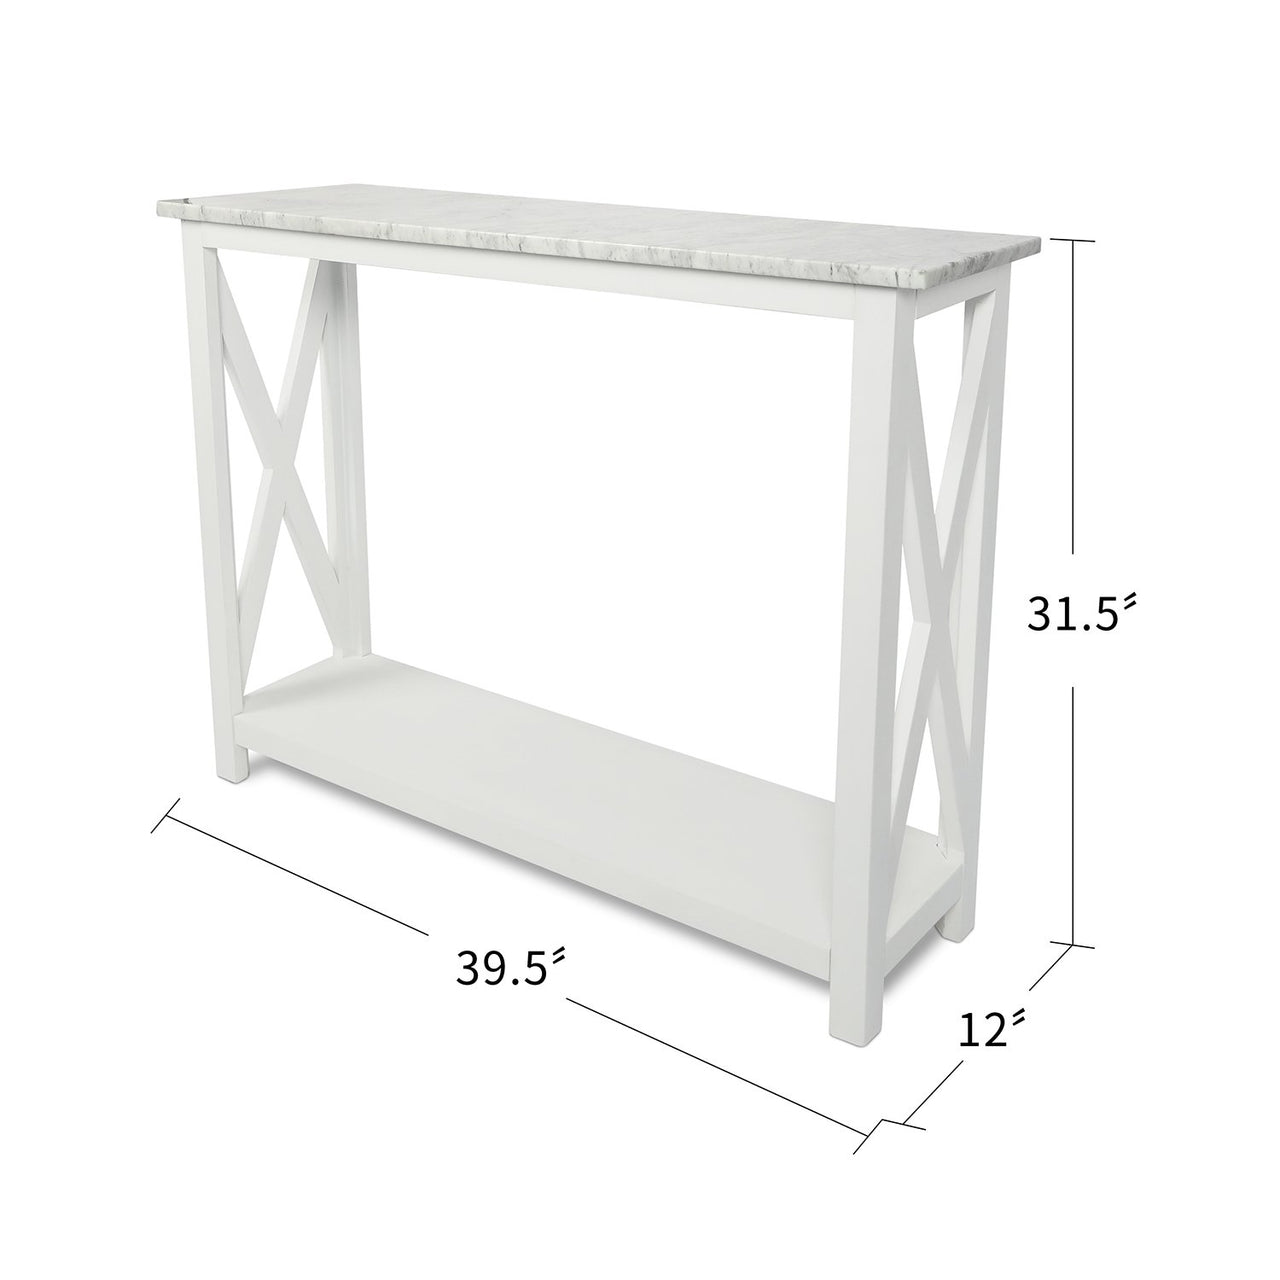 Agatha 39" Rectangular Italian Carrara White Marble Console Table with Color Solid Wood Legs Writing Desk The Bianco Collection 